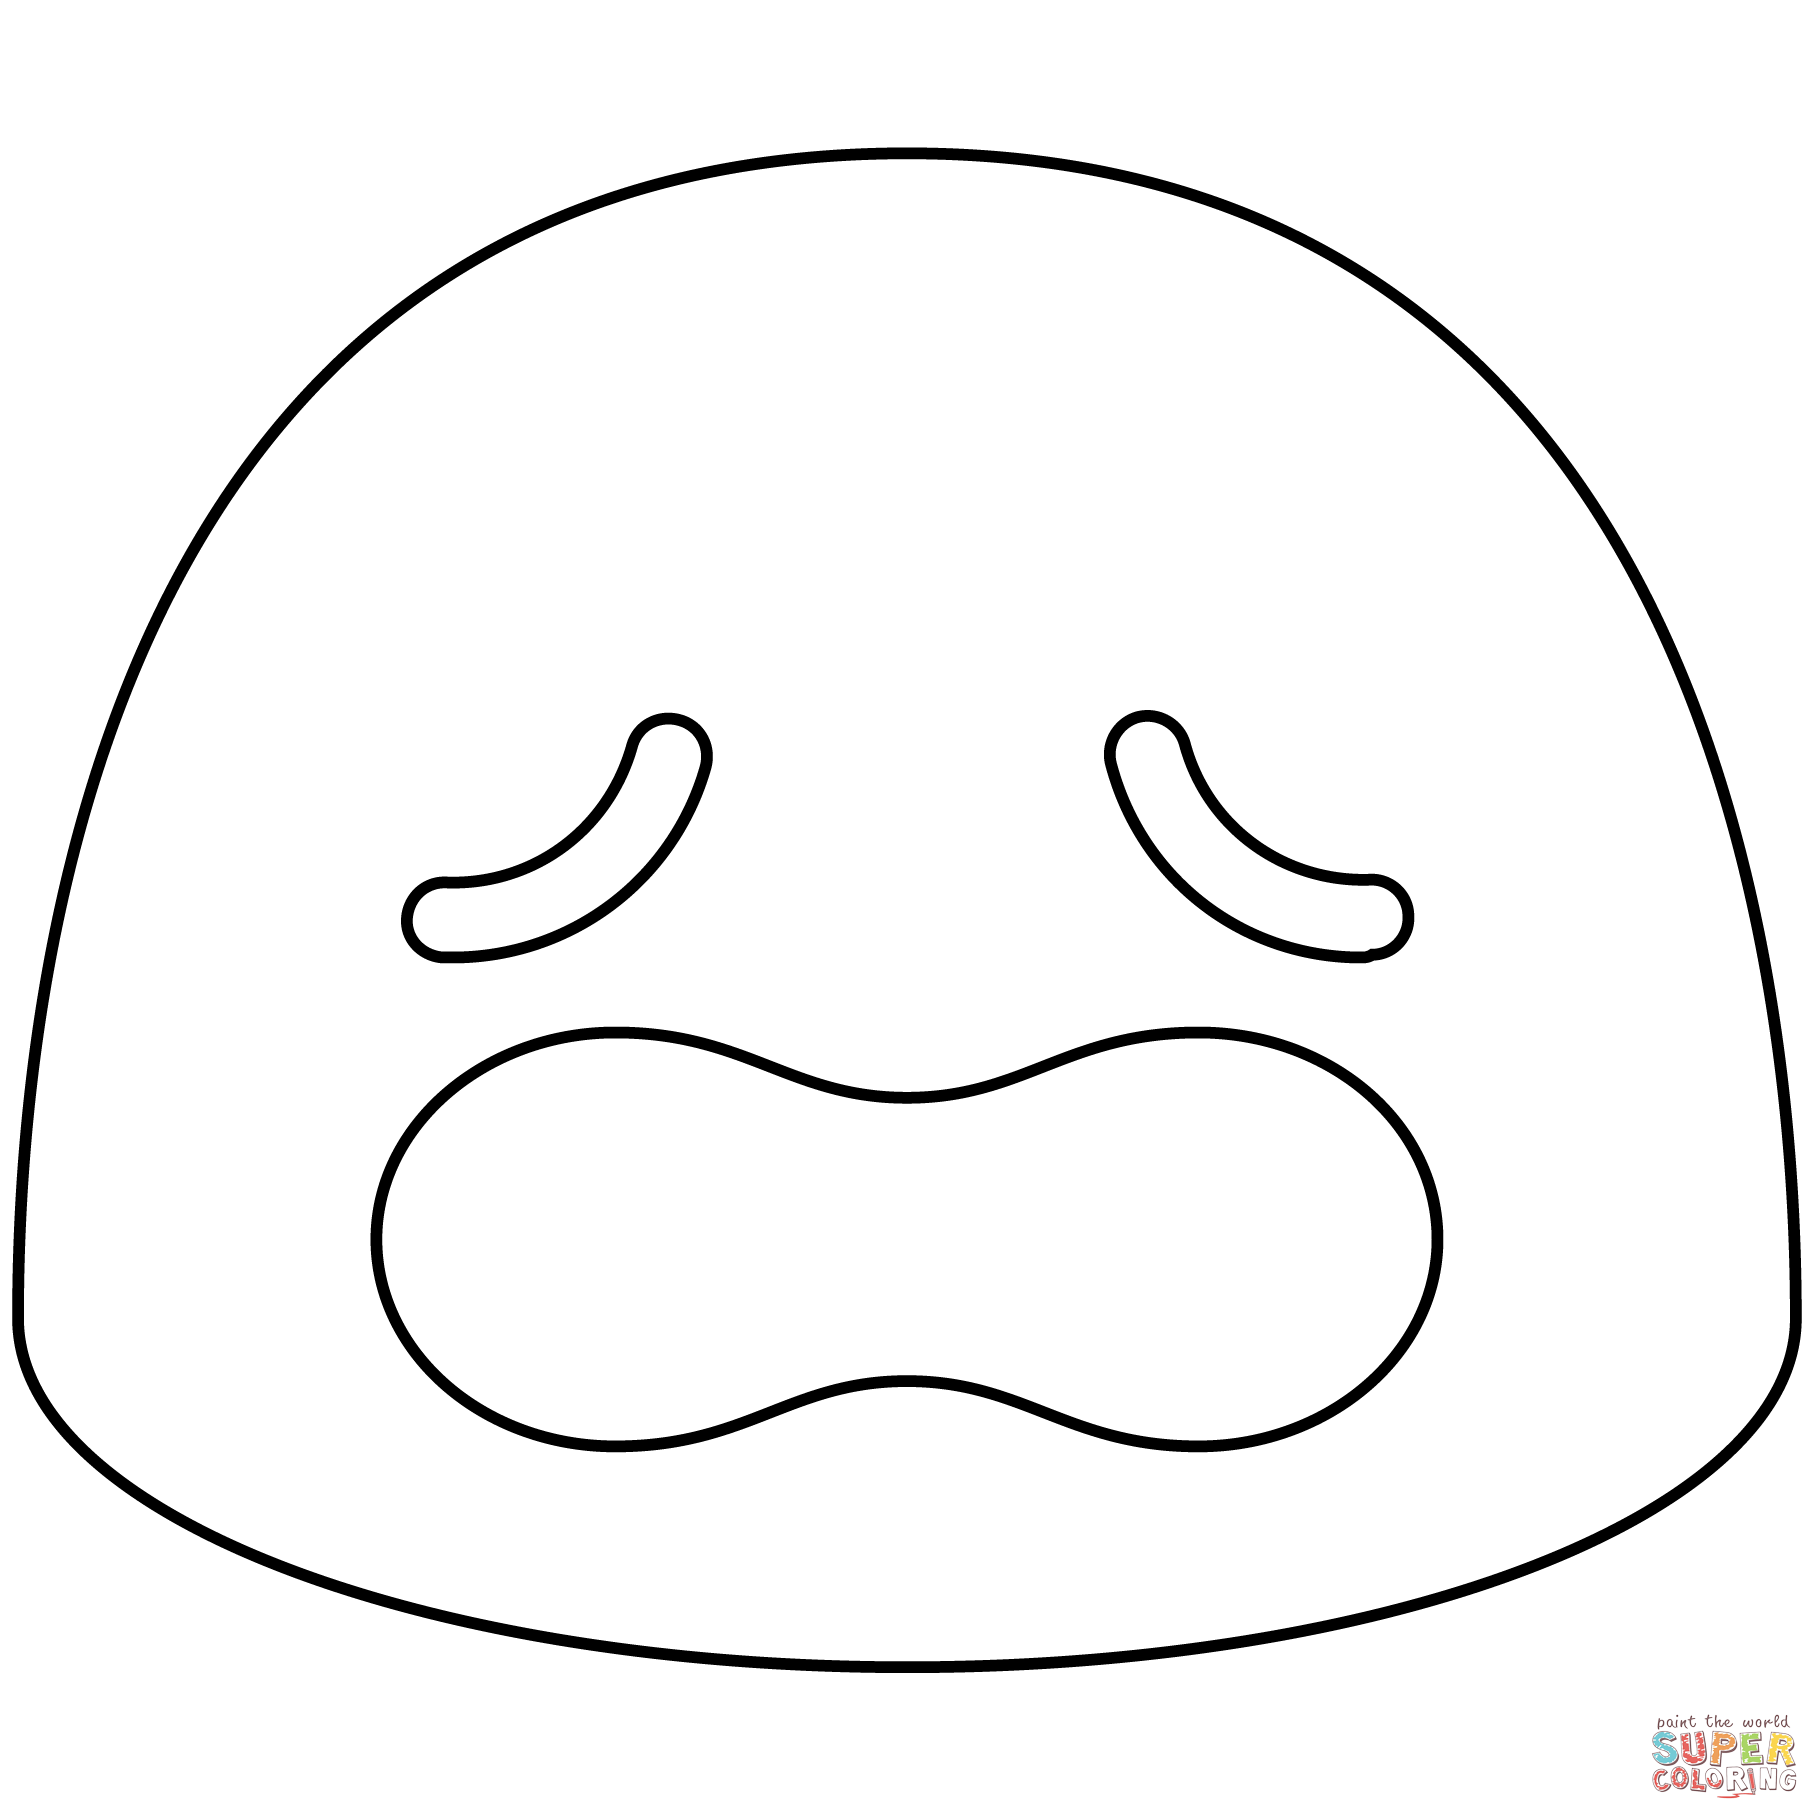 Weary face emoji coloring page free printable coloring pages